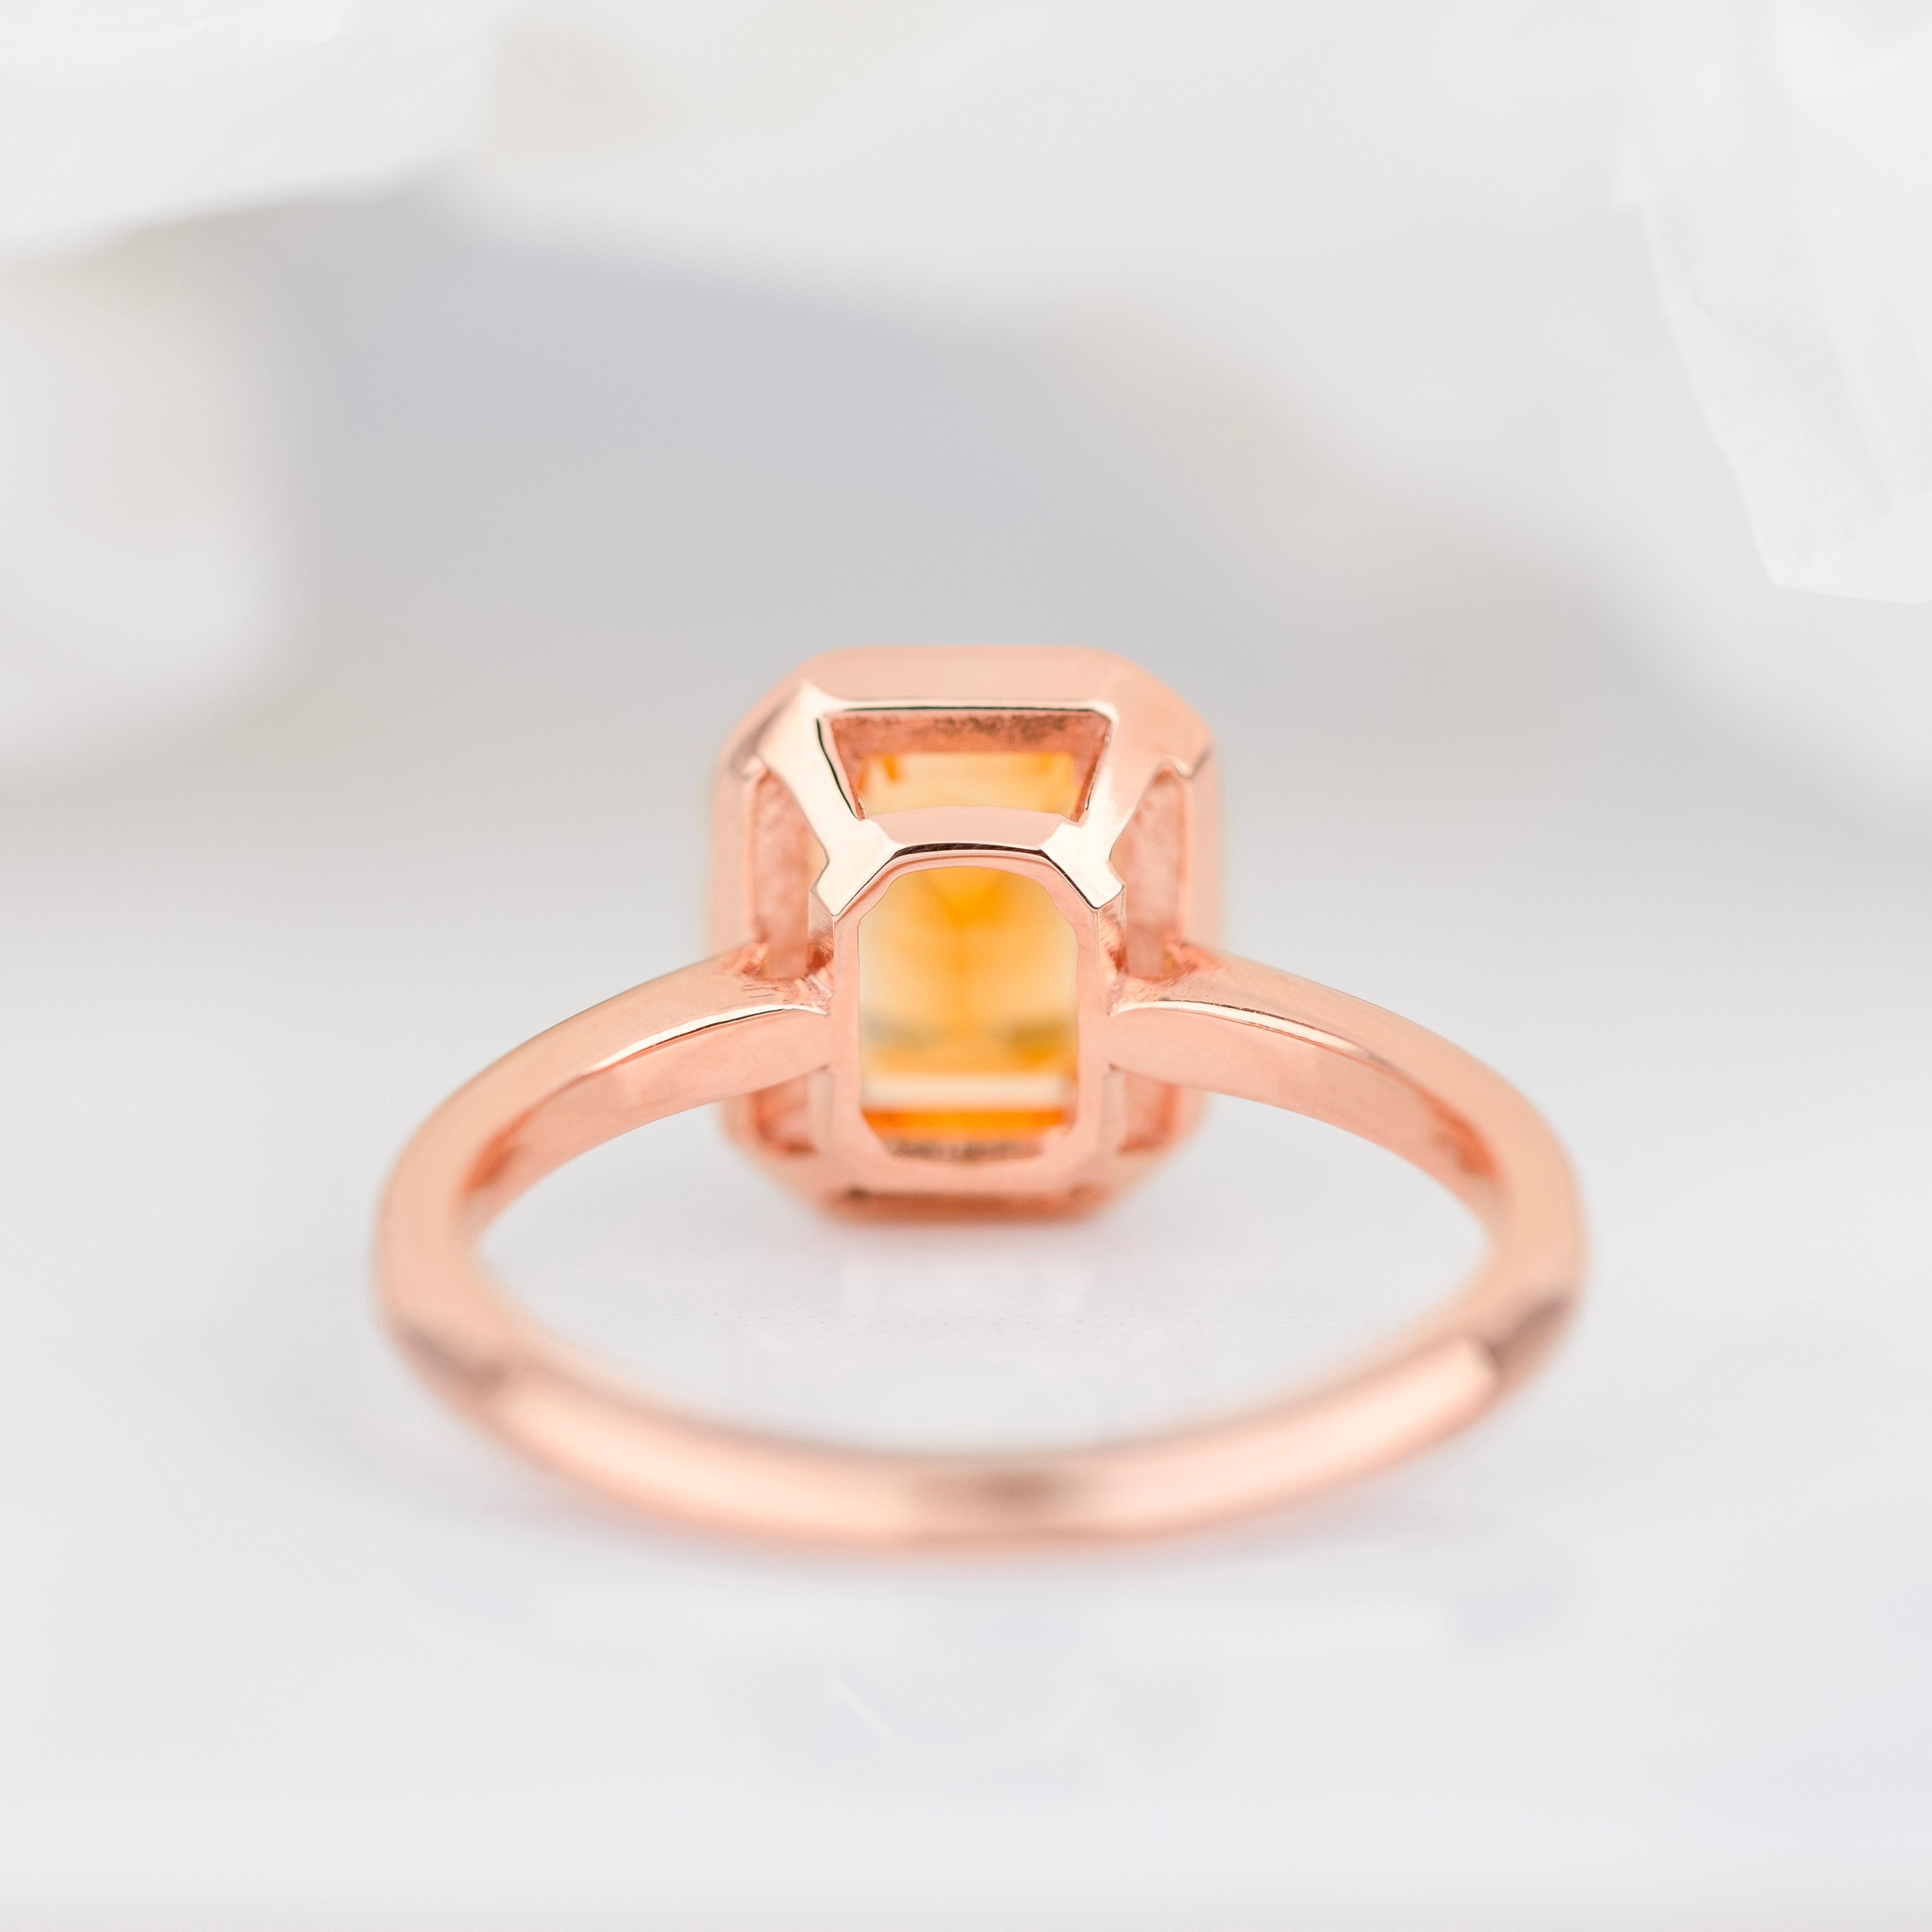 Women's or Men's Art Deco Style, 0.90-1.00 Ct Citrine Stone and Colorful Enamel, 14K Gold Ring For Sale